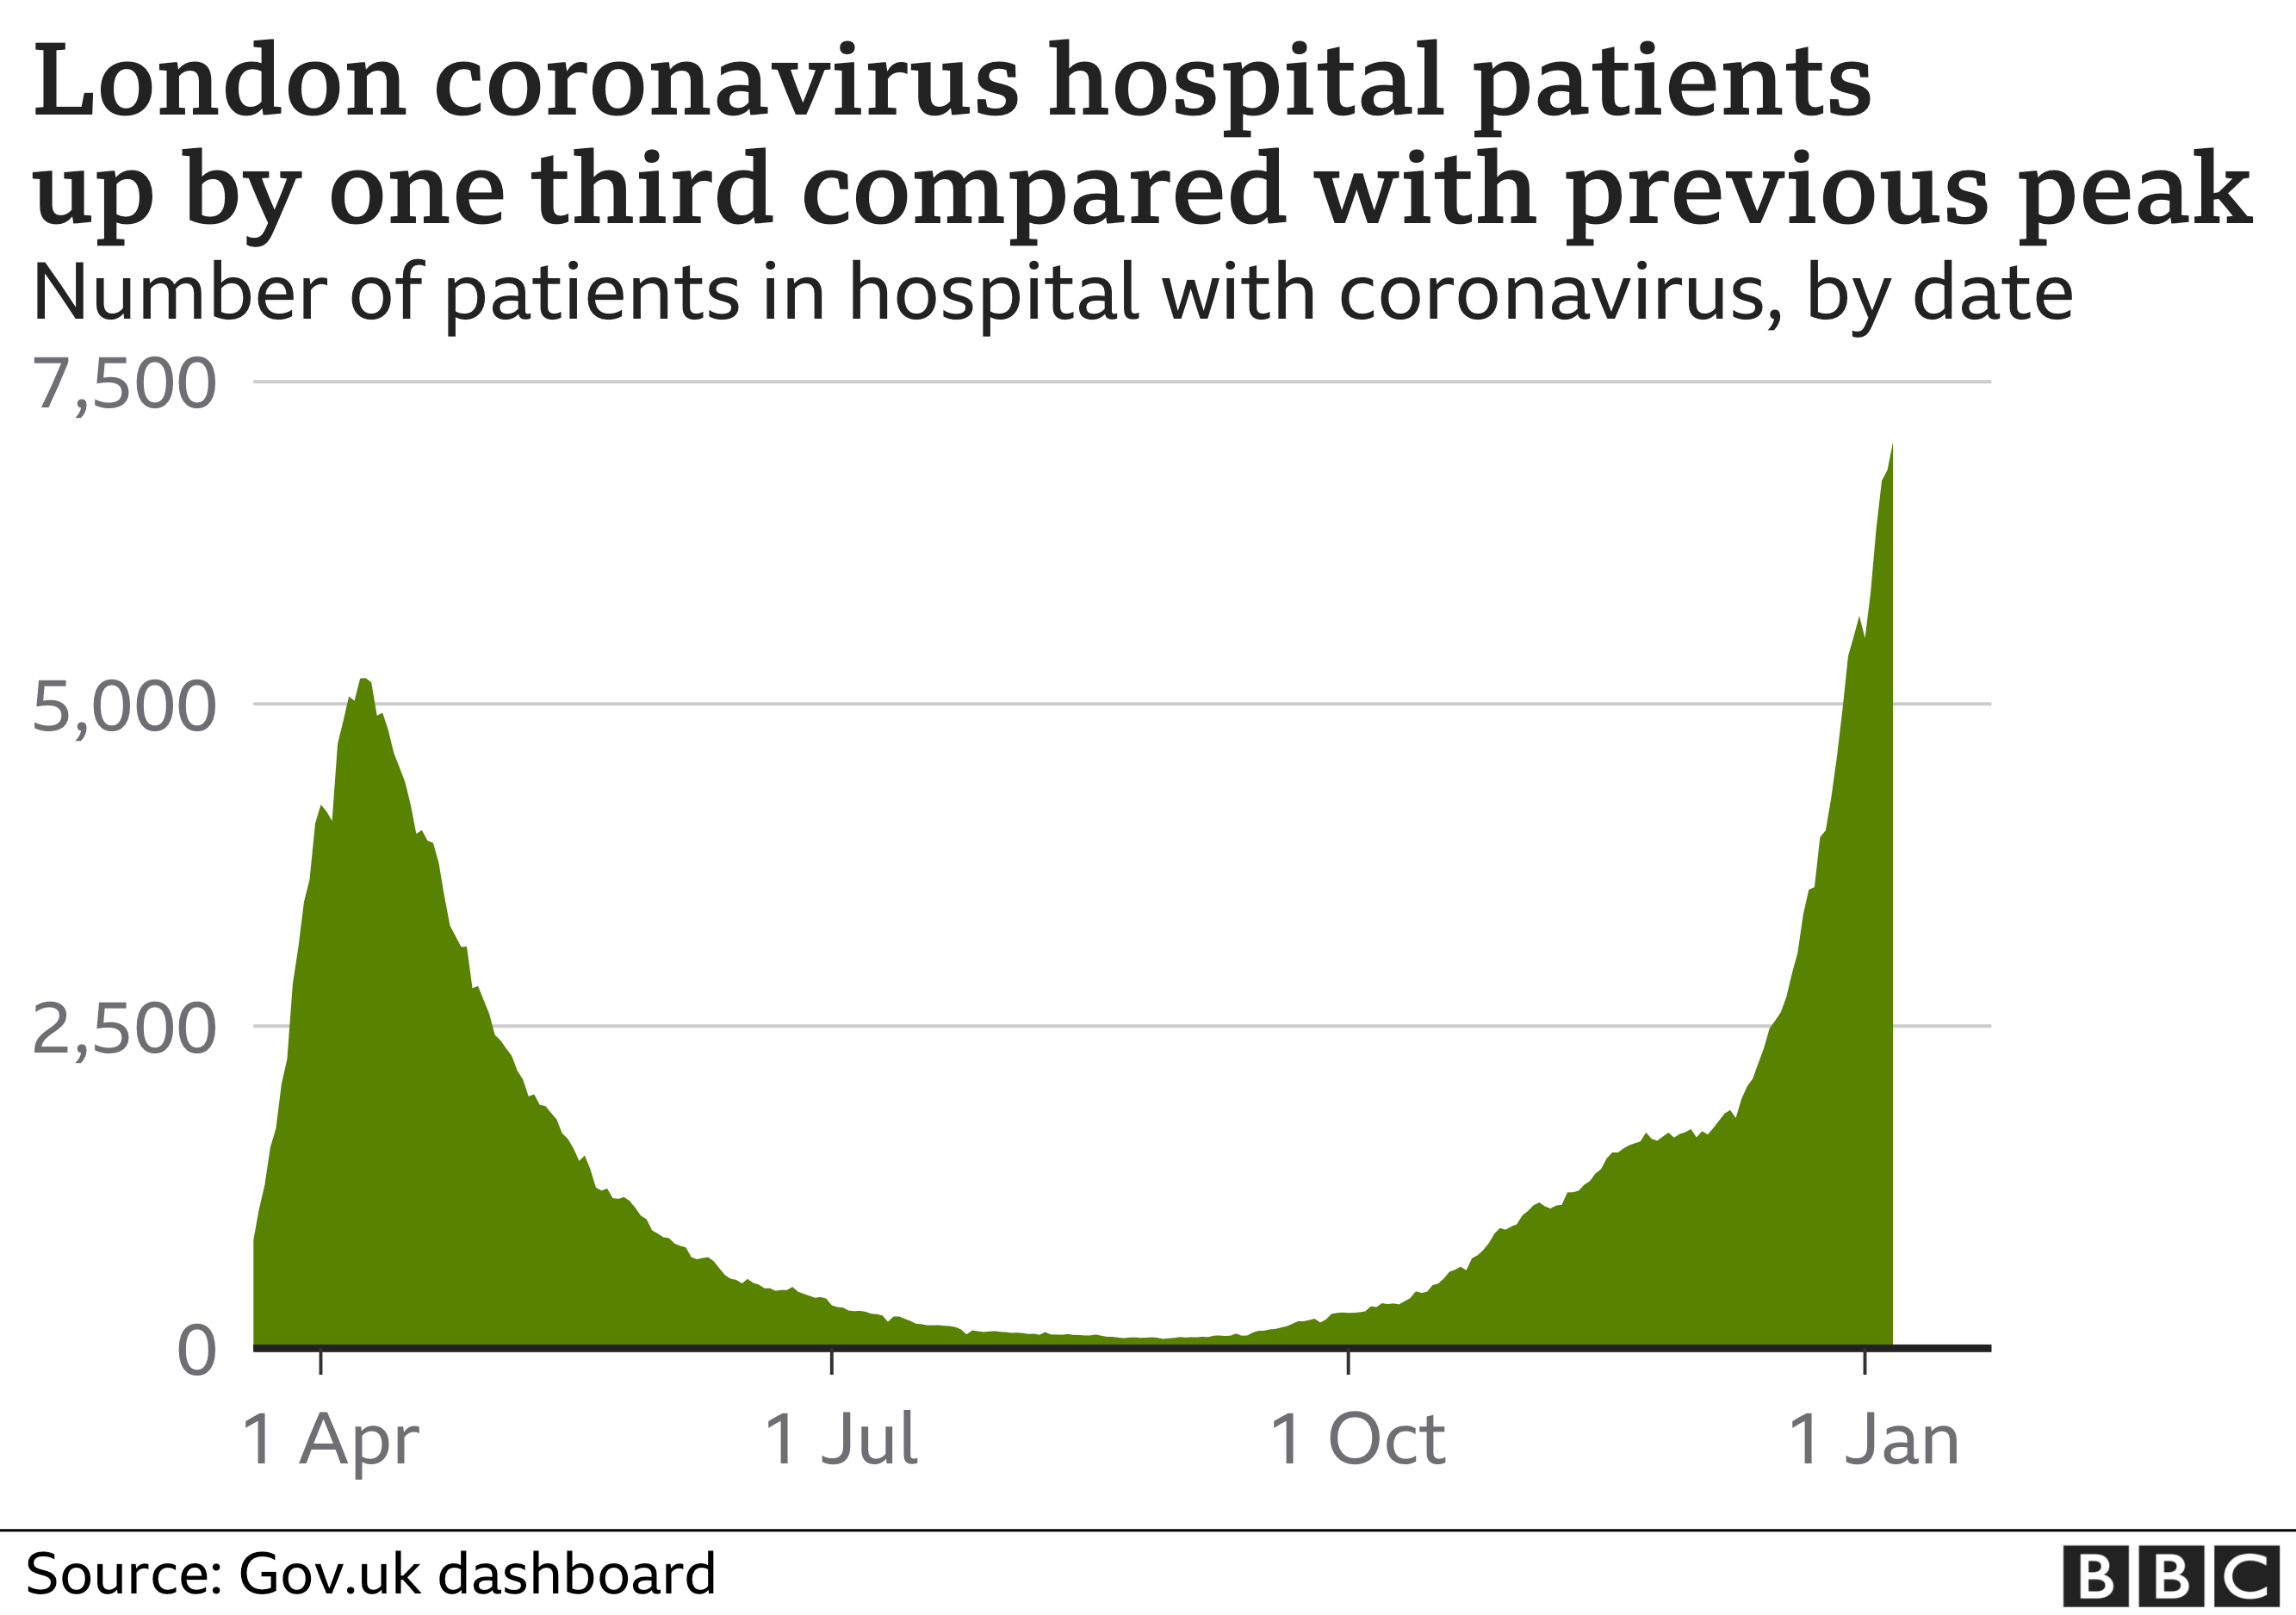 Chart showing the number of coronavirus hospital patients in London